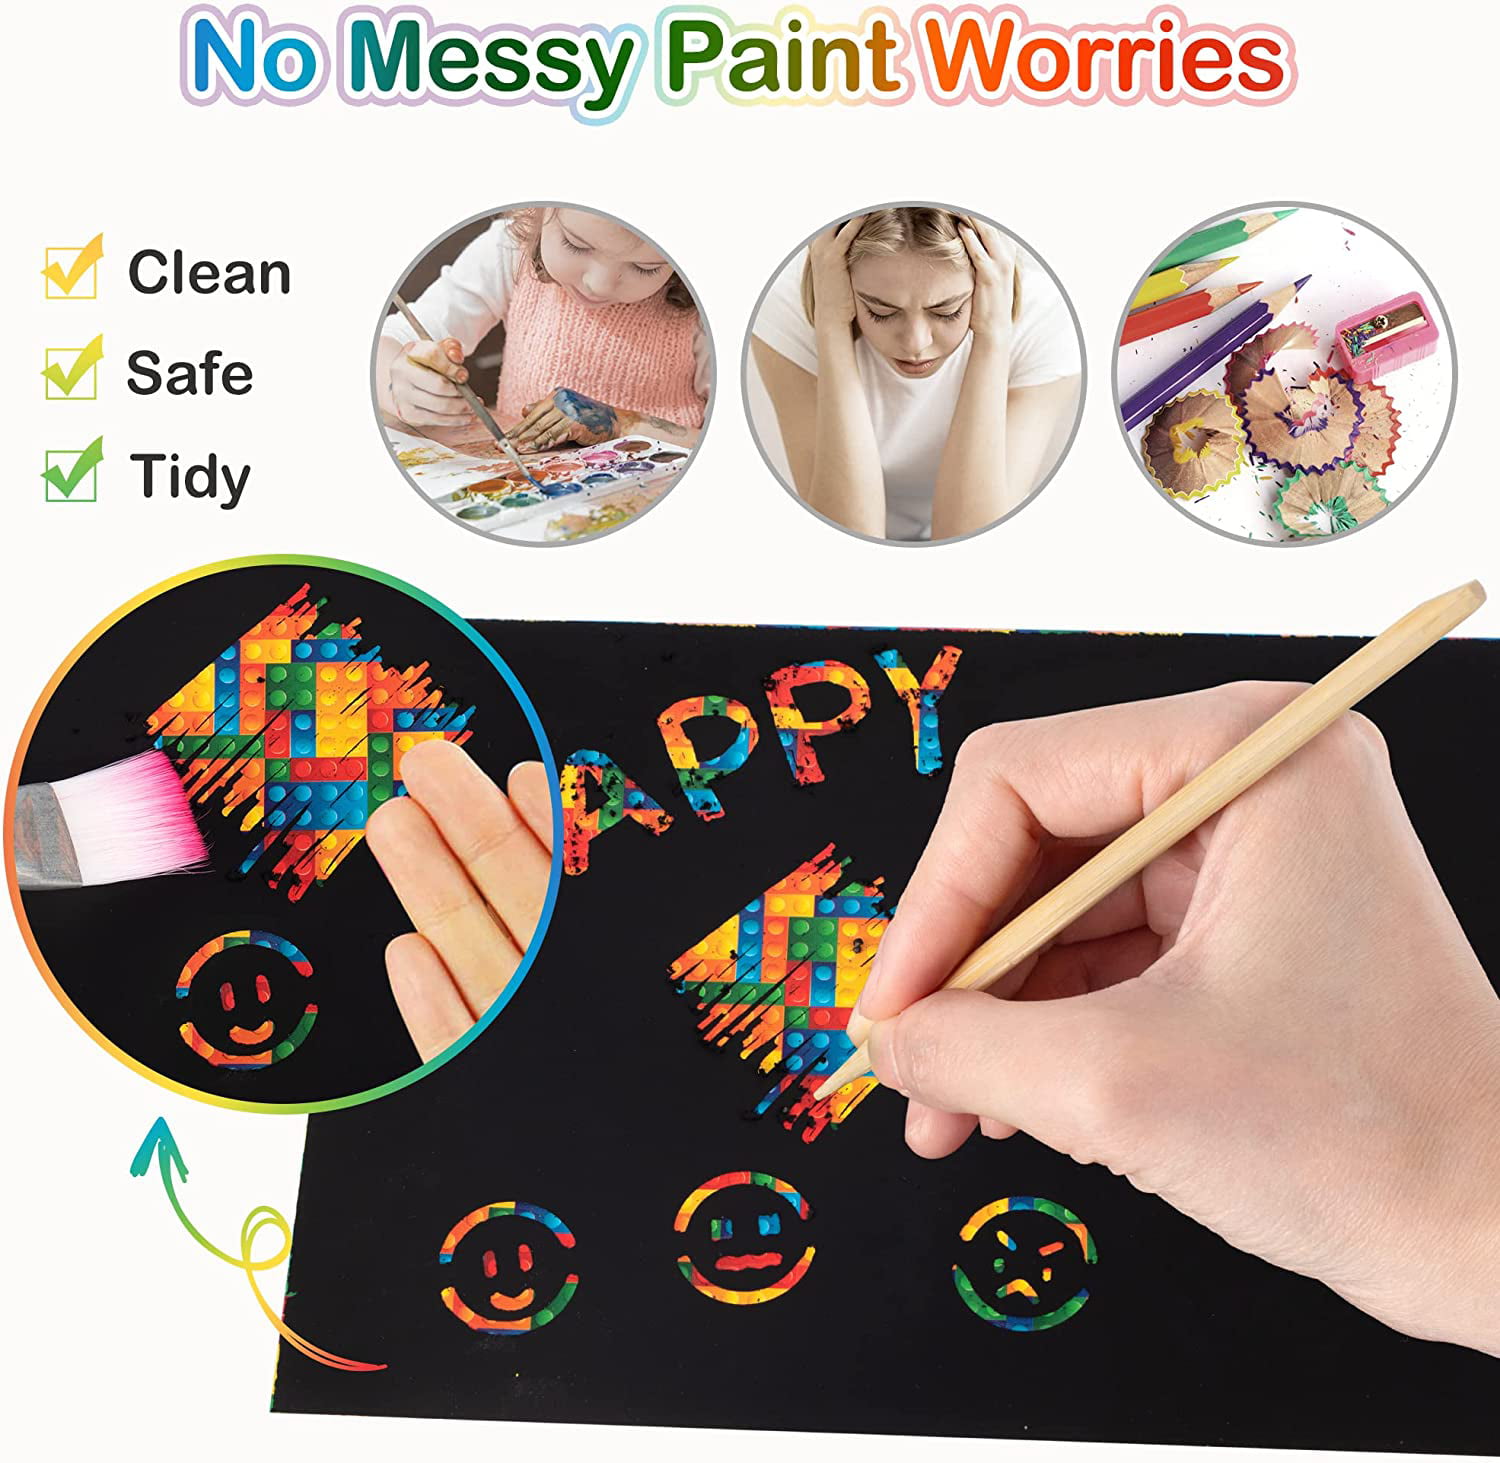  TyNox 60Pcs Scratch Paper Art Set for Kids, Rainbow Magic  Scratch Off Paper Sheets Art Craft Kit Black Scratch Note Paper Drawing  Pads with Stencils for Party Game Activities DIY Projects 